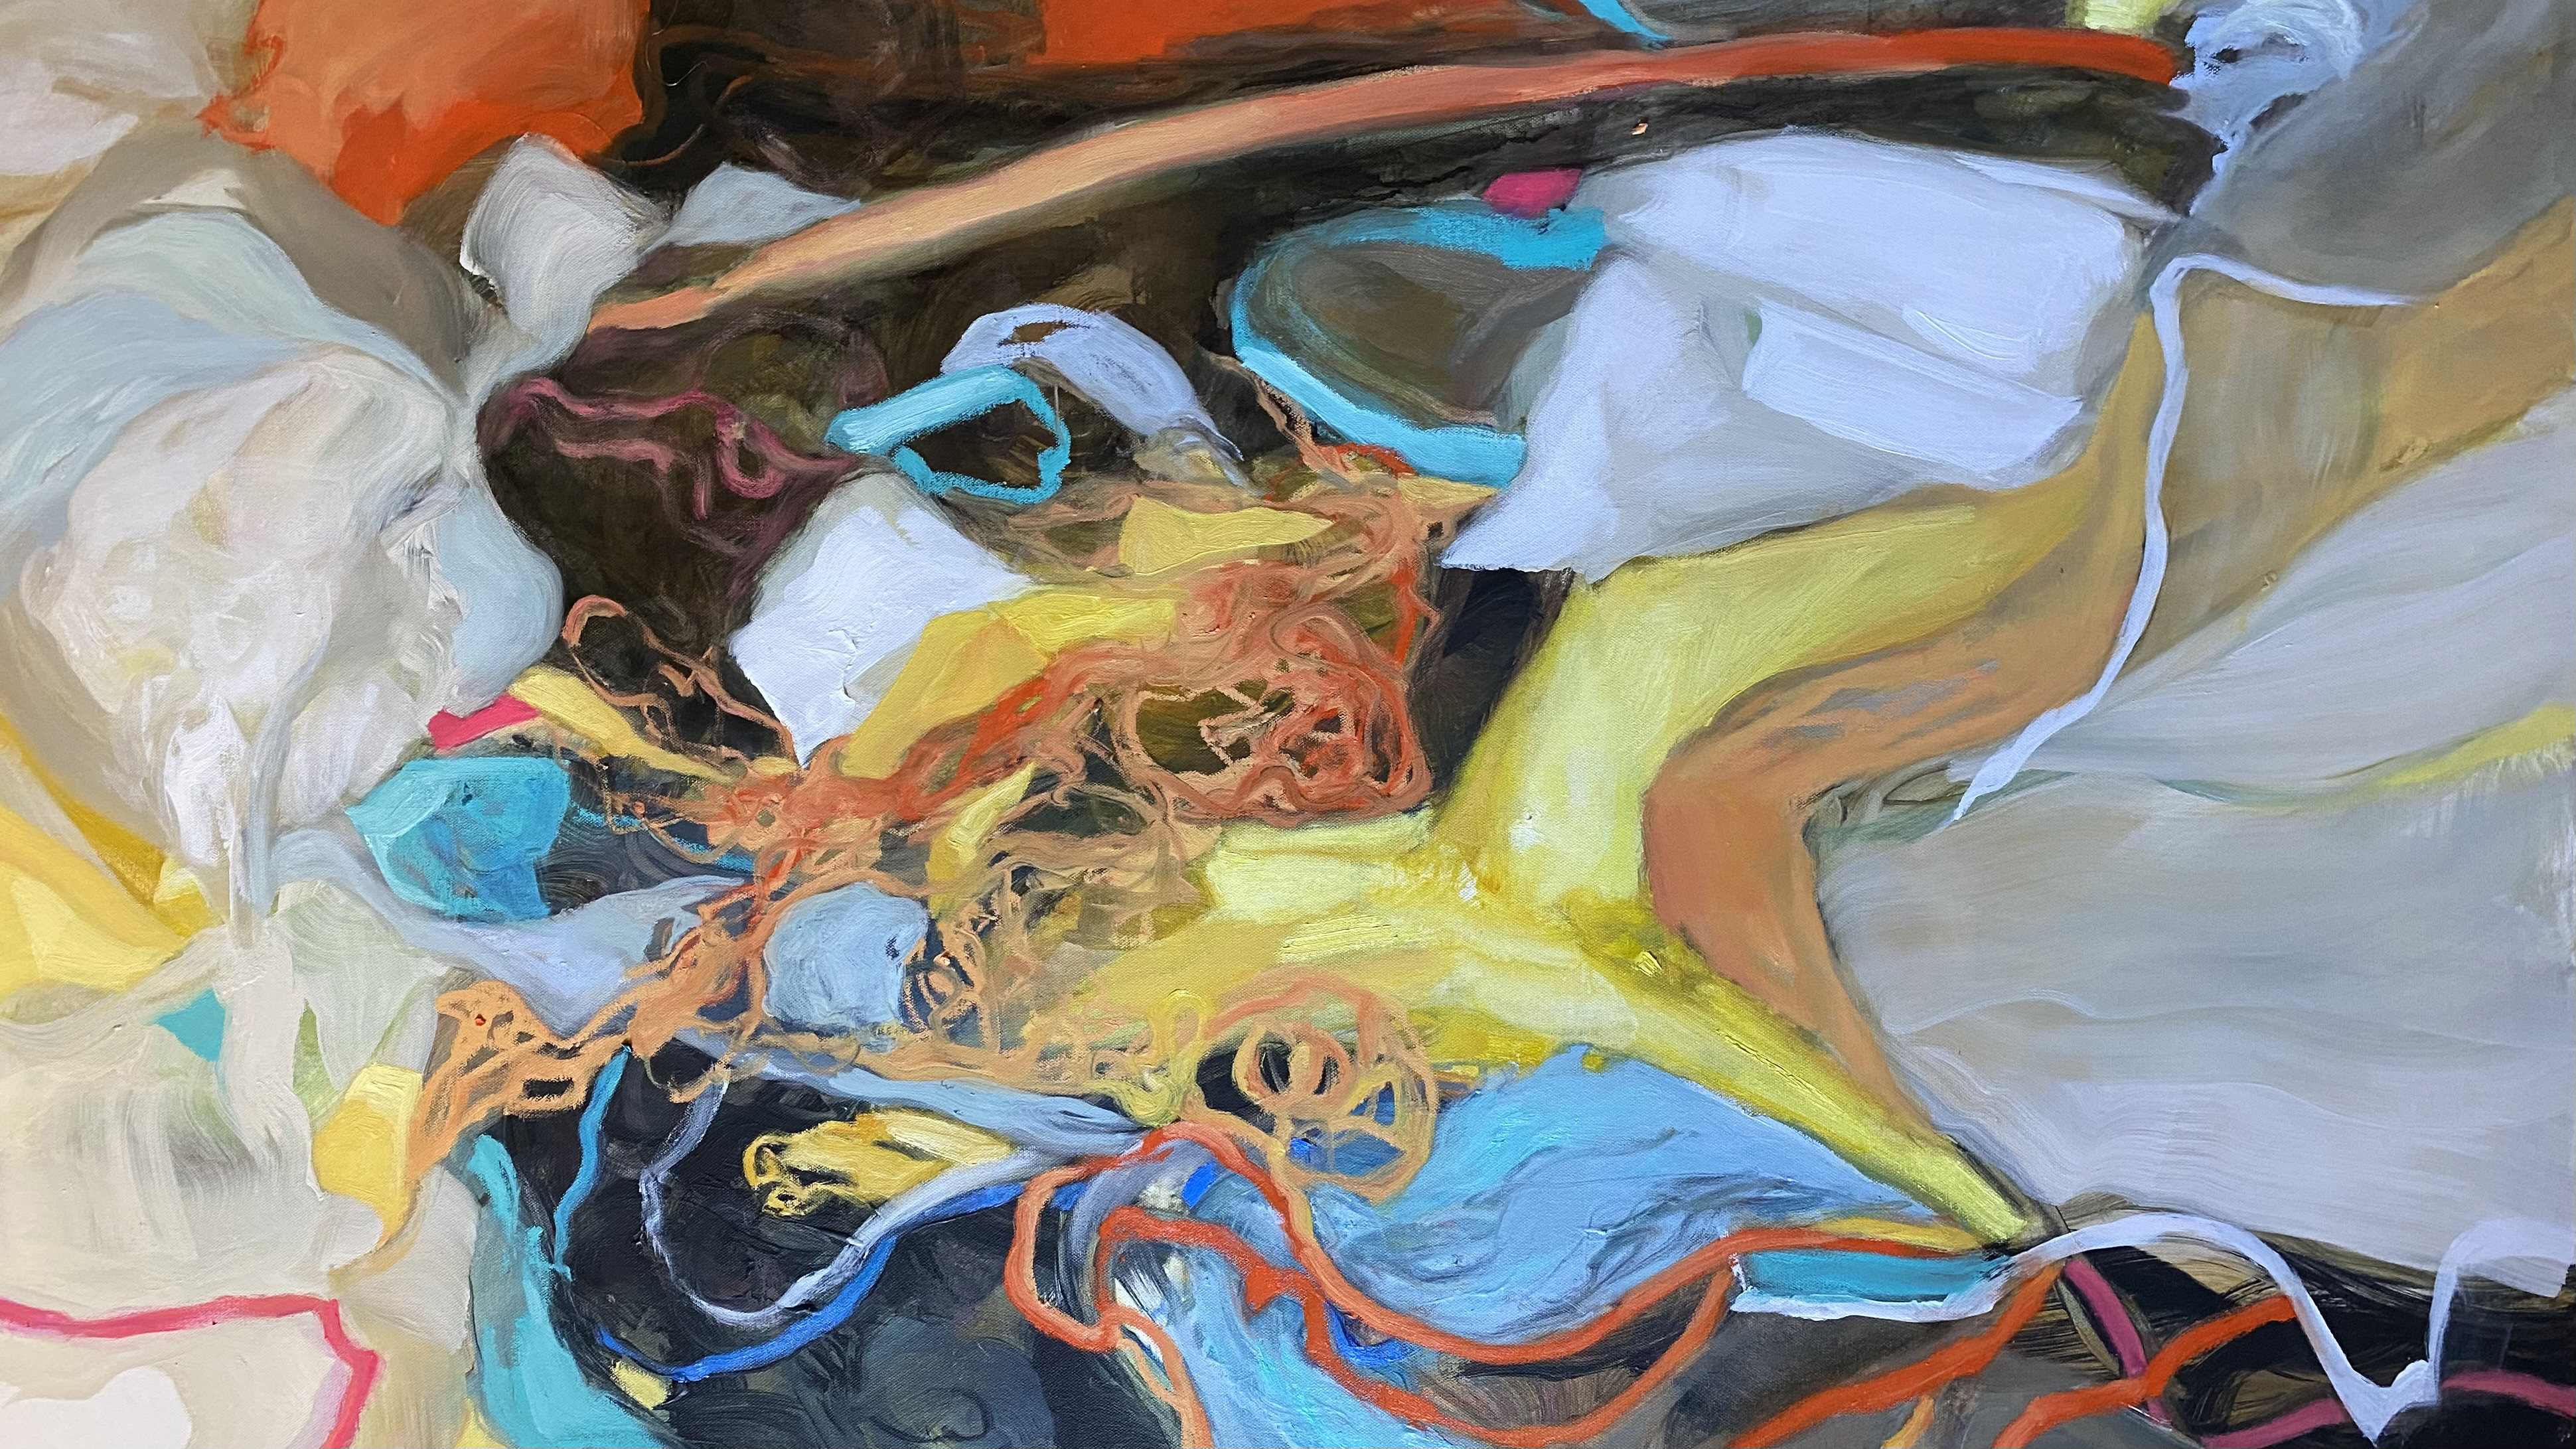 An abstract painting painting of intertwining rivulets of different widths of cream, yellow, blue, orange, and black